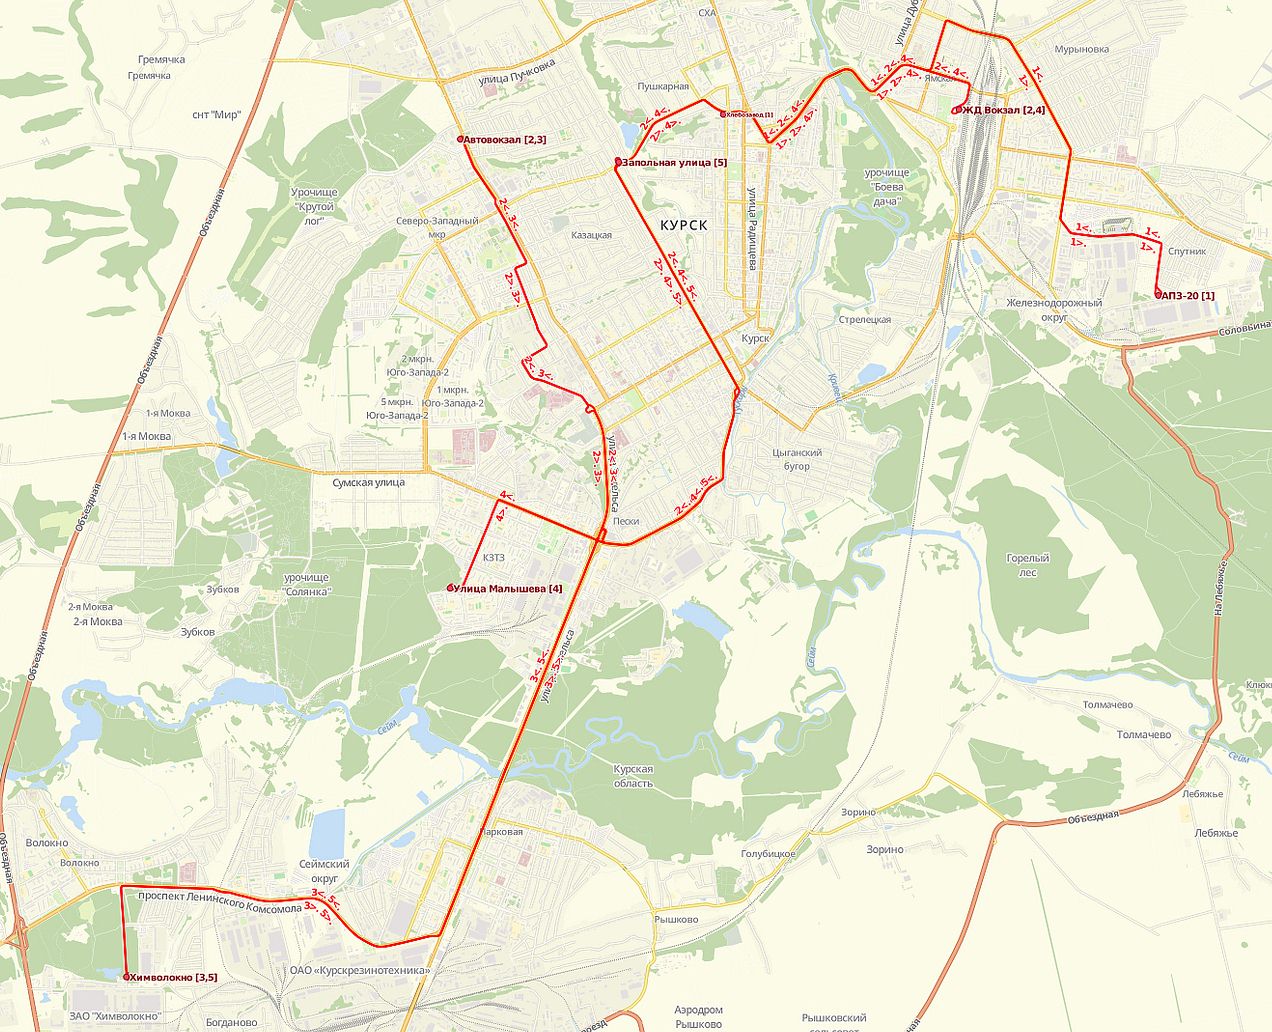 map of kursk